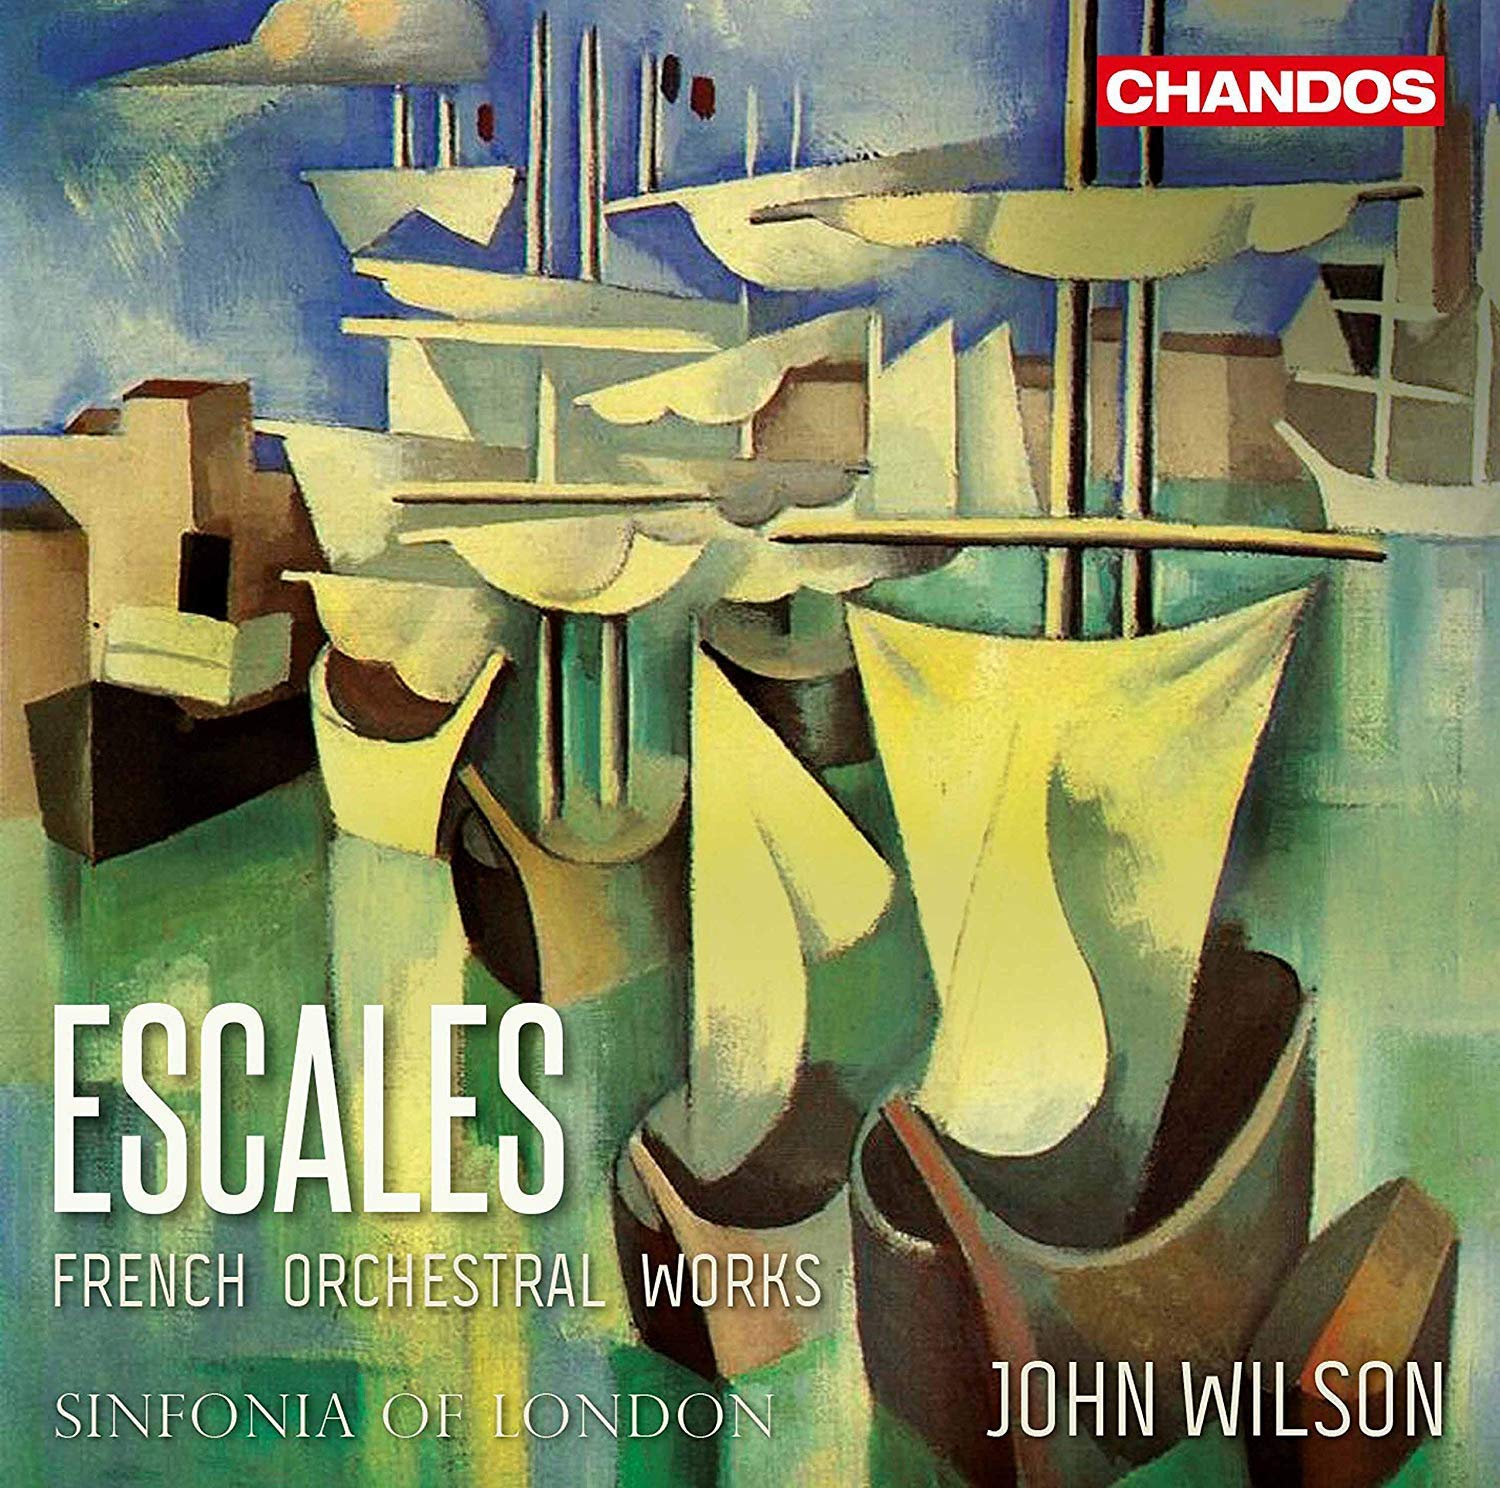 CHSA5252. Escales: French Orchestral Works